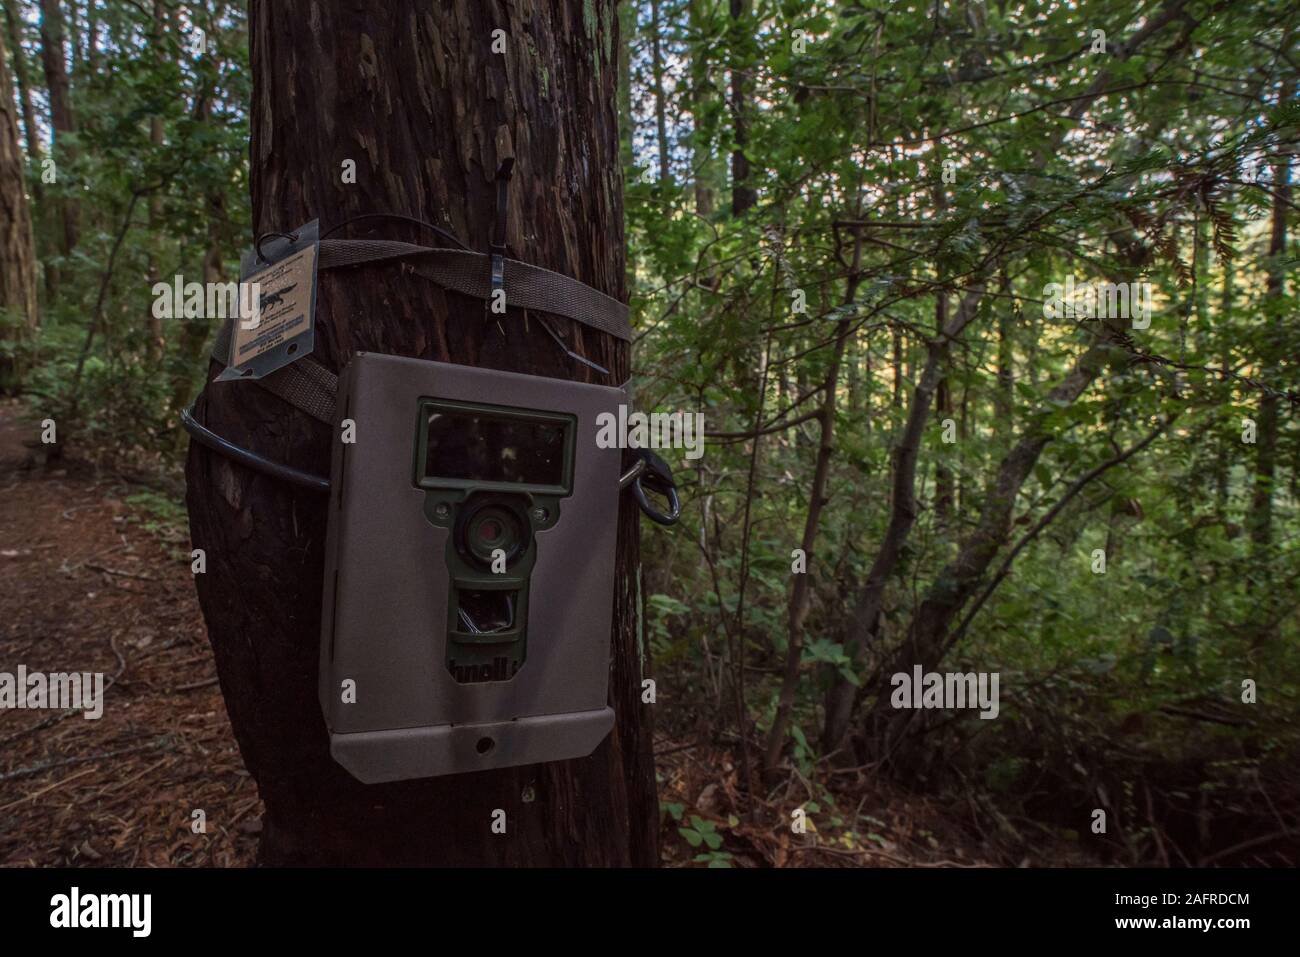 A remote camera trap set up to monitor wildlife in the forest on a trail in California, USA. Stock Photo